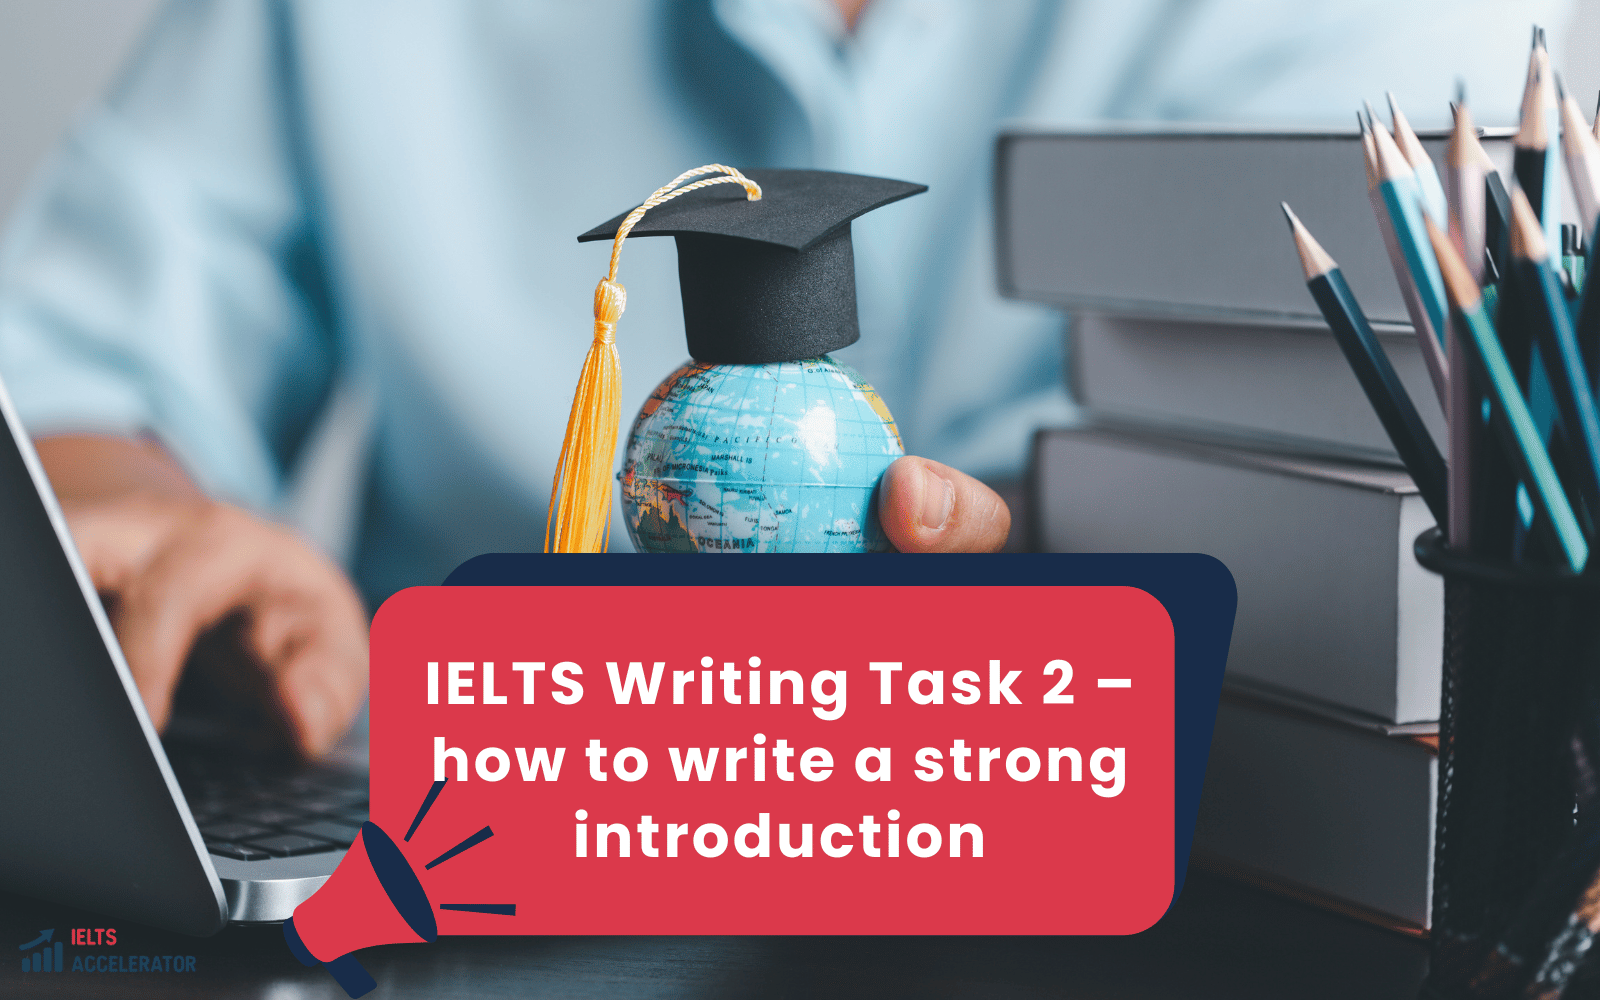 IELTS Writing Task 2 – how to write a strong introduction